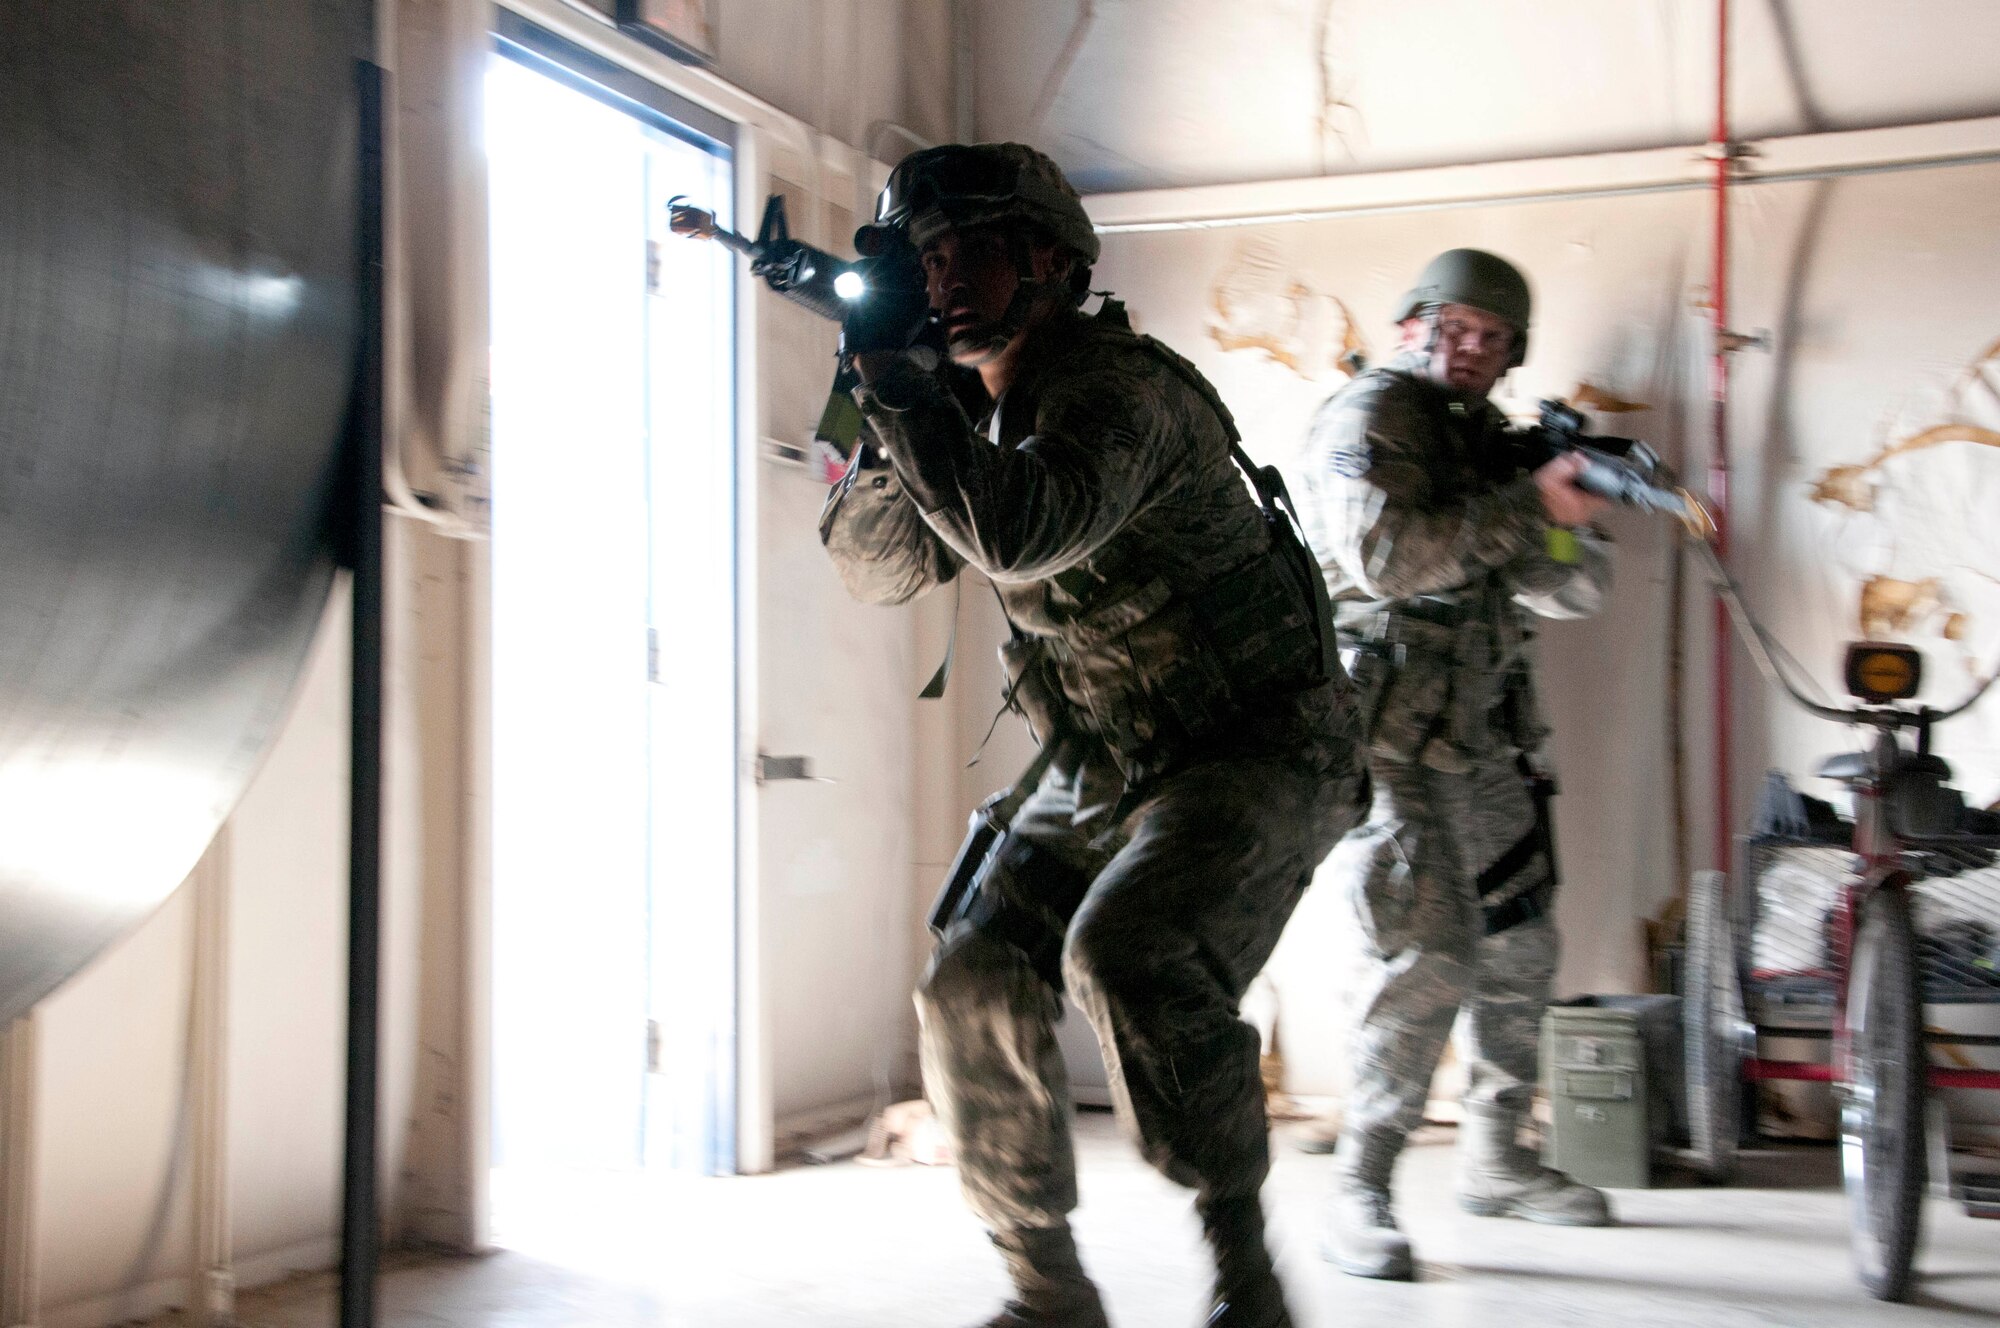 Senior Airman Samuel Alanis (left) and Staff Sgt. Brad Guzman seek out a simulated active shooter during an exercise at the 162nd Fighter Wing in Tucson Ariz. Both troops are from the Security Forces Squadron, whose members were being trained and evaluated in response to a simulated active shooter.  (U.S. Air Force photo/Master Sgt. David Neve)